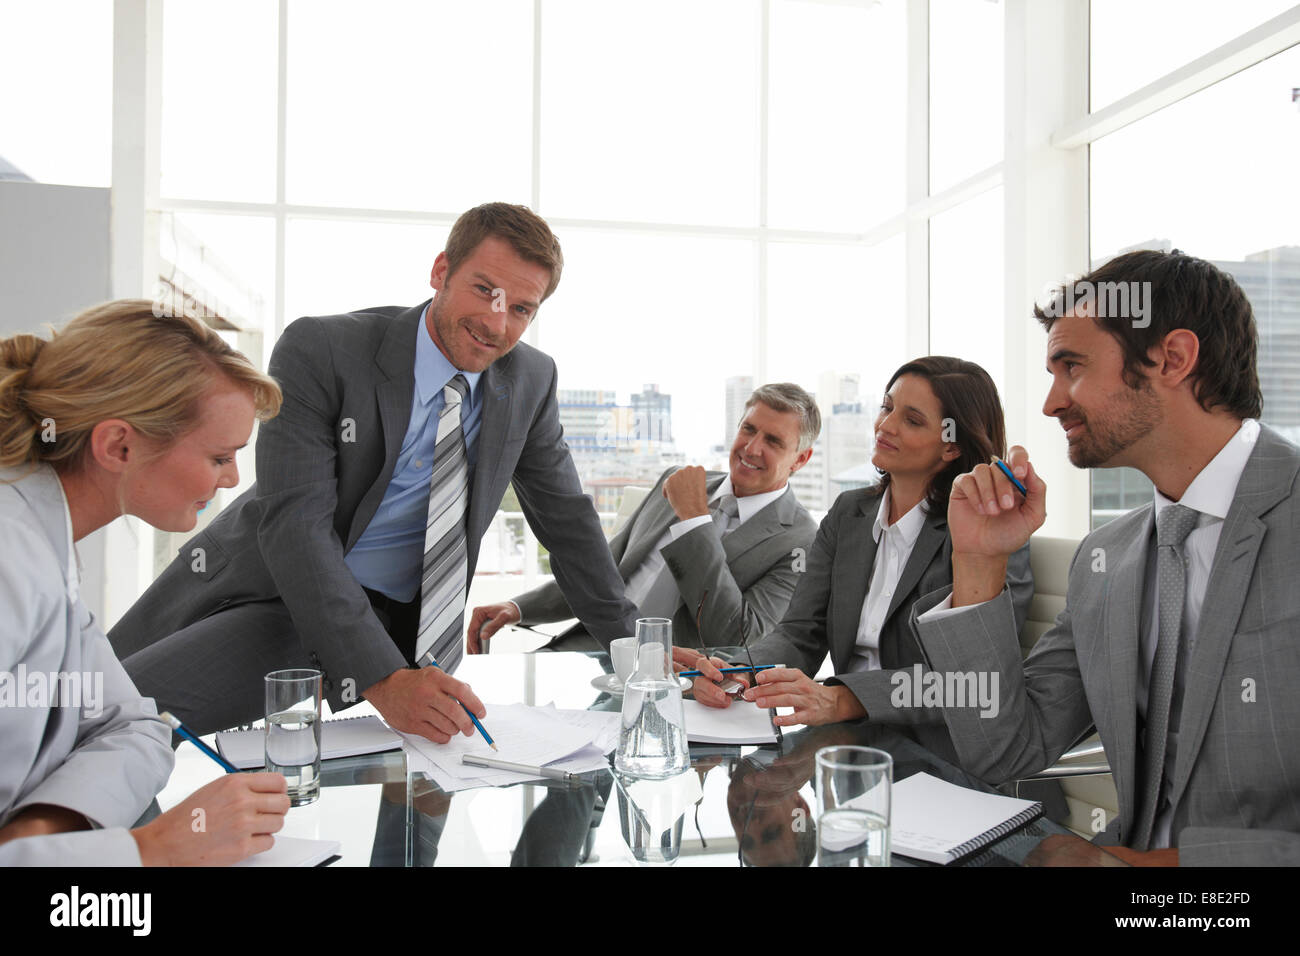 Young man leading a meeting Stock Photo